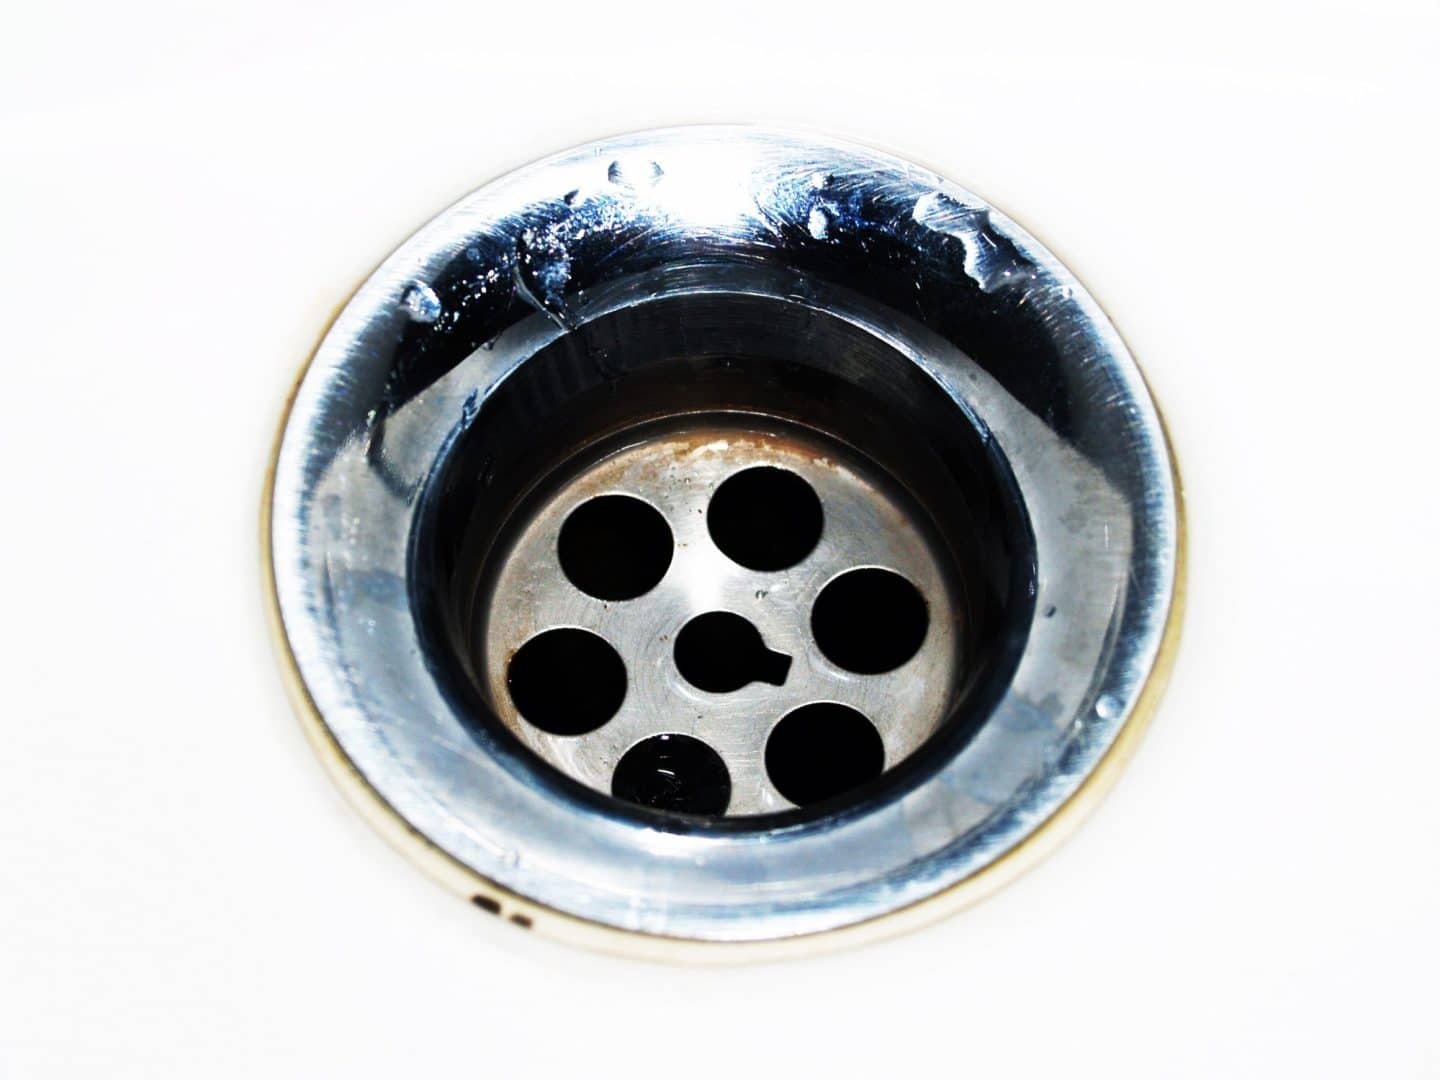 4 Unavoidable Signs You Need To Get Your San Diego Drains Cleaned